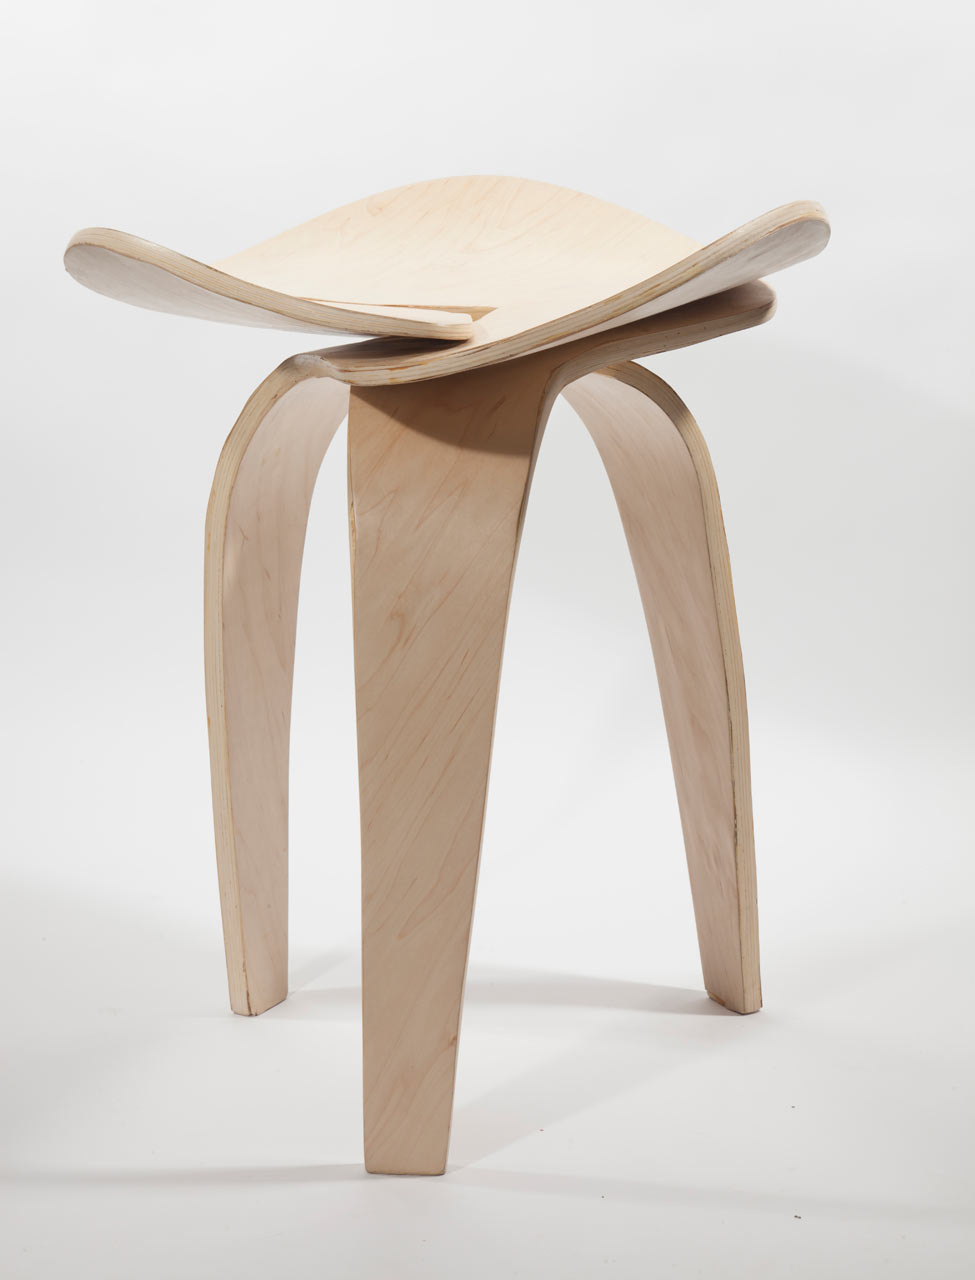 Trio: A Jointless Stool by Andrea Quiros-Balma